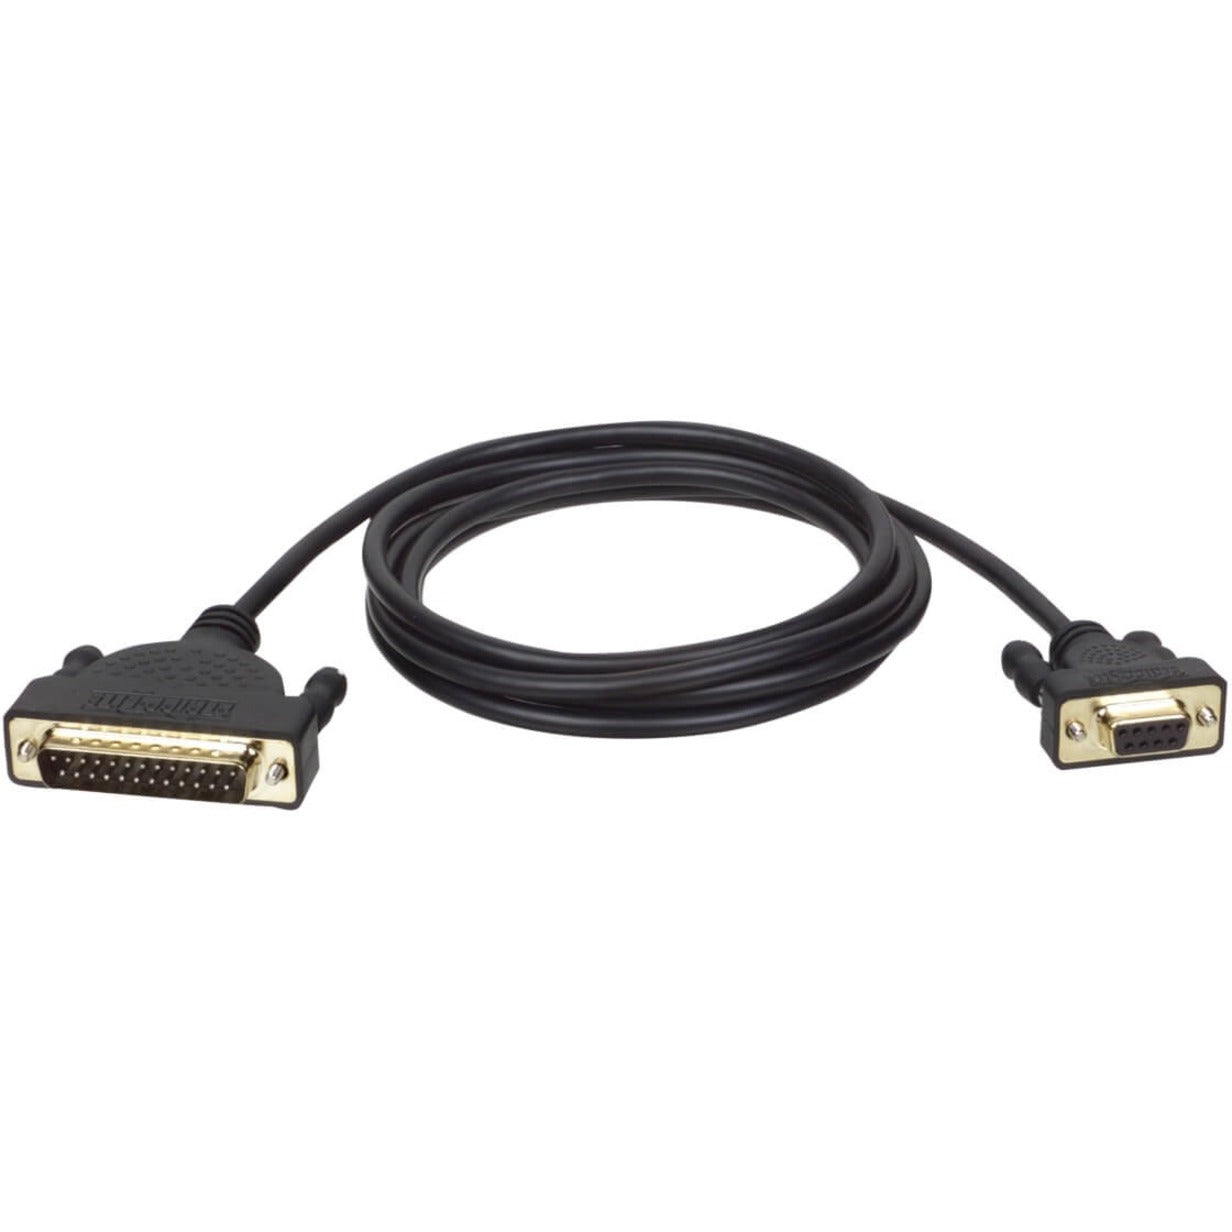 Tripp Lite P404-006 AT/Serial Modem Cable, 6 ft, DB25M to DB9F